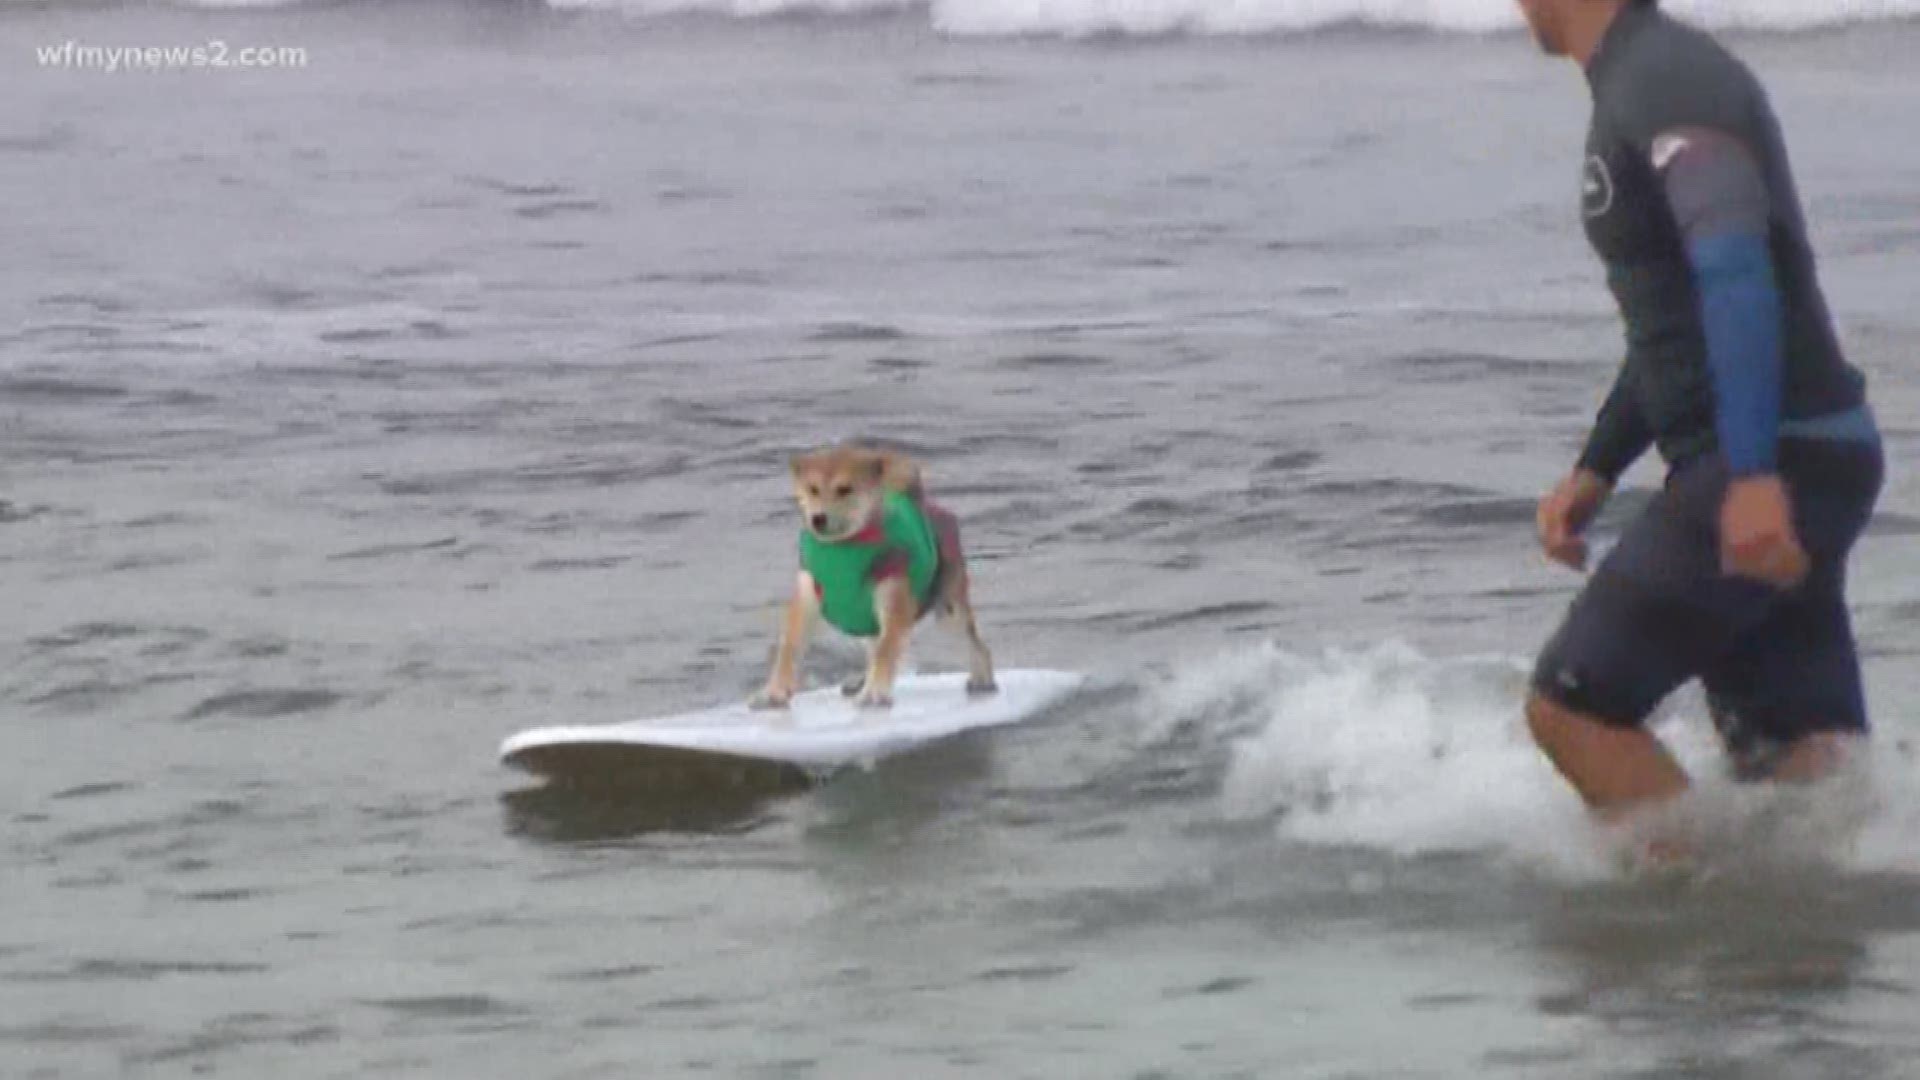 Surf’s up, dude – or should we say “dog.” More than 70 dogs competed in an annual surfing competition, in which all proceeds benefit homeless pets.